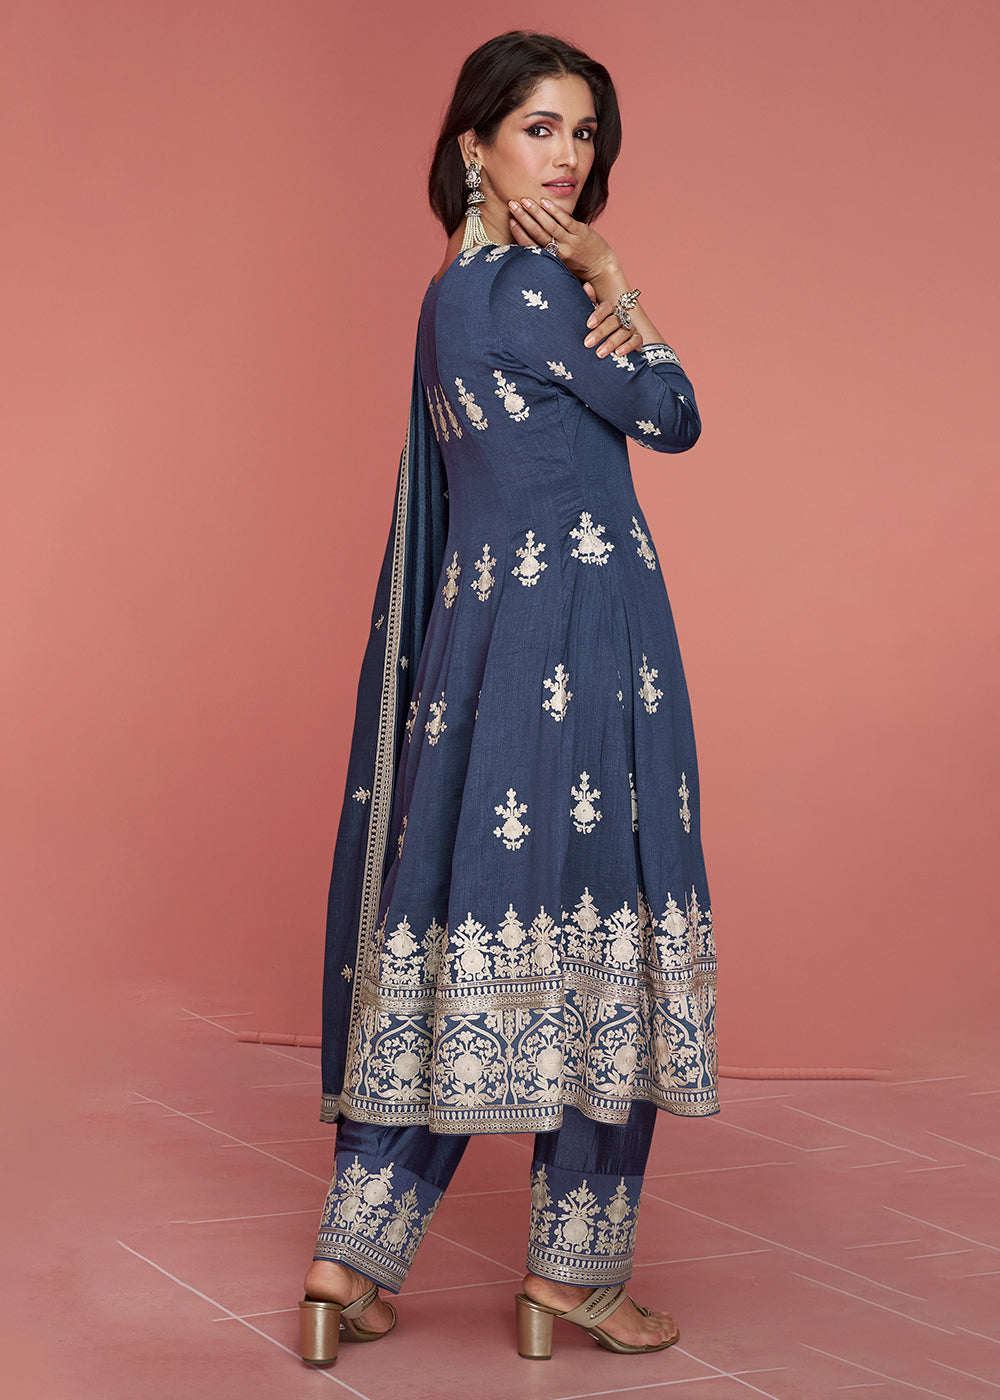 Buy Now Punjabi Style Silk Embroidered Salwar Suit in Lavender Blue Online in USA, UK, Canada, Germany, Australia & Worldwide at Empress Clothing.